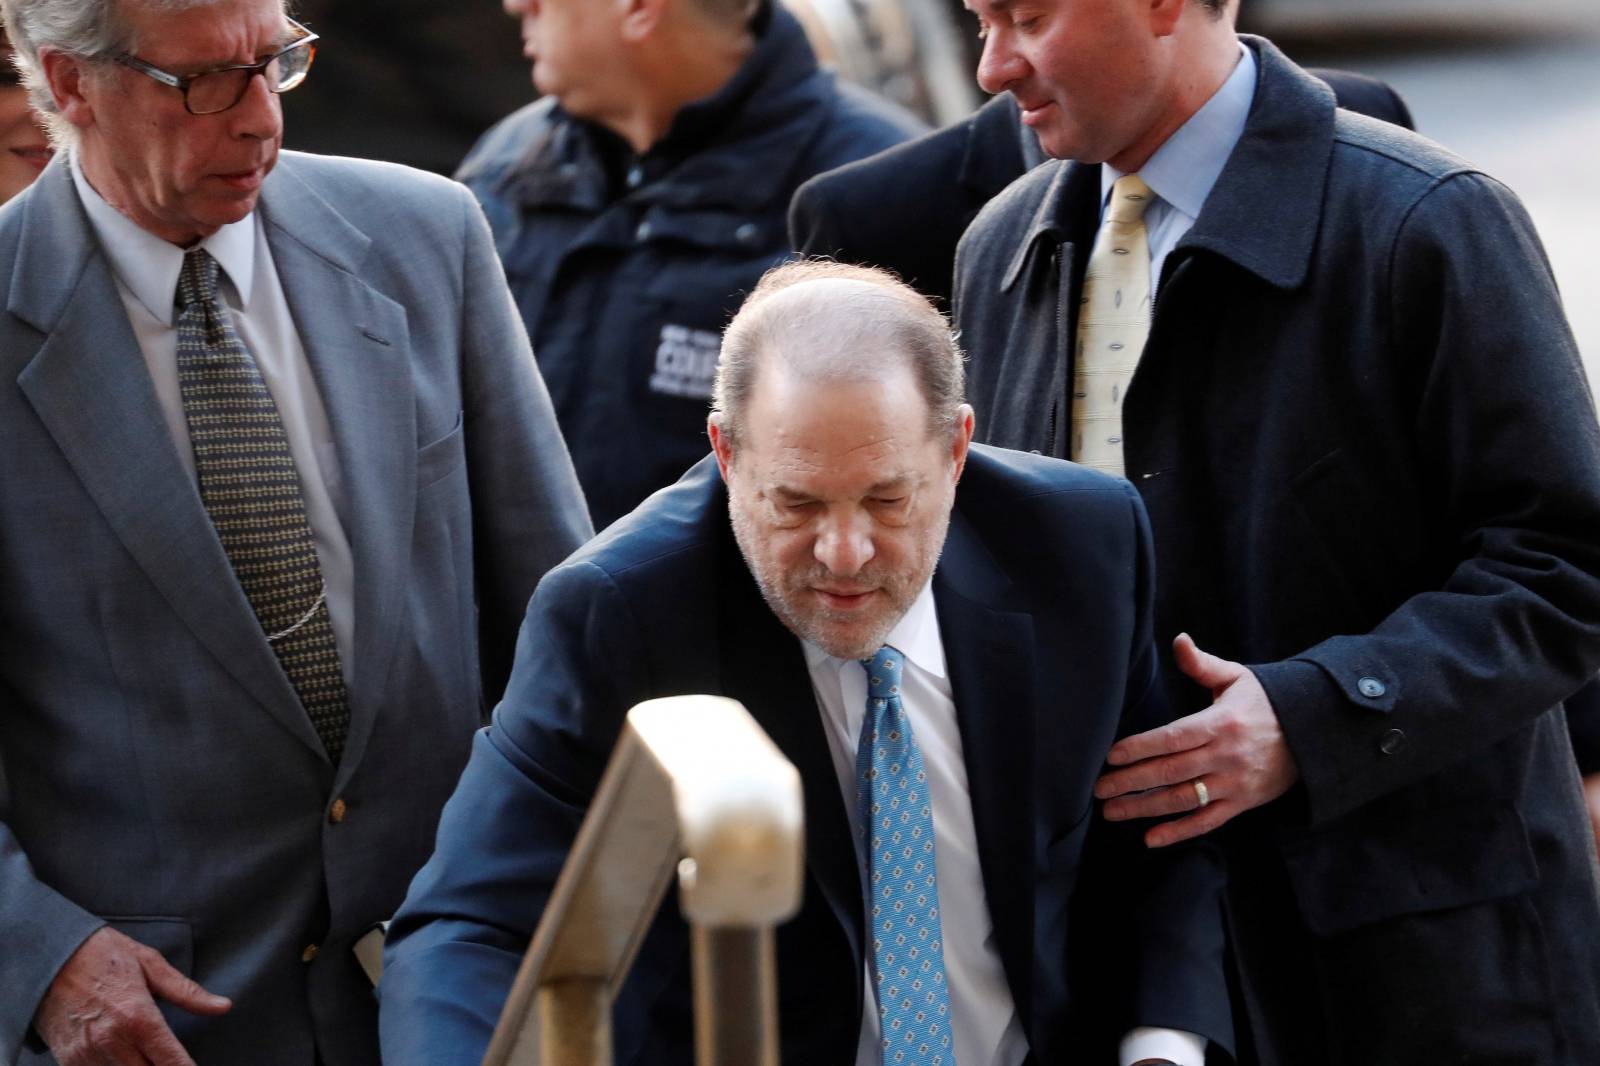 FILE PHOTO: Harvey Weinstein arrives at New York Criminal Court for another day of jury deliberations in his sexual assault trial in the Manhattan borough of New York City,